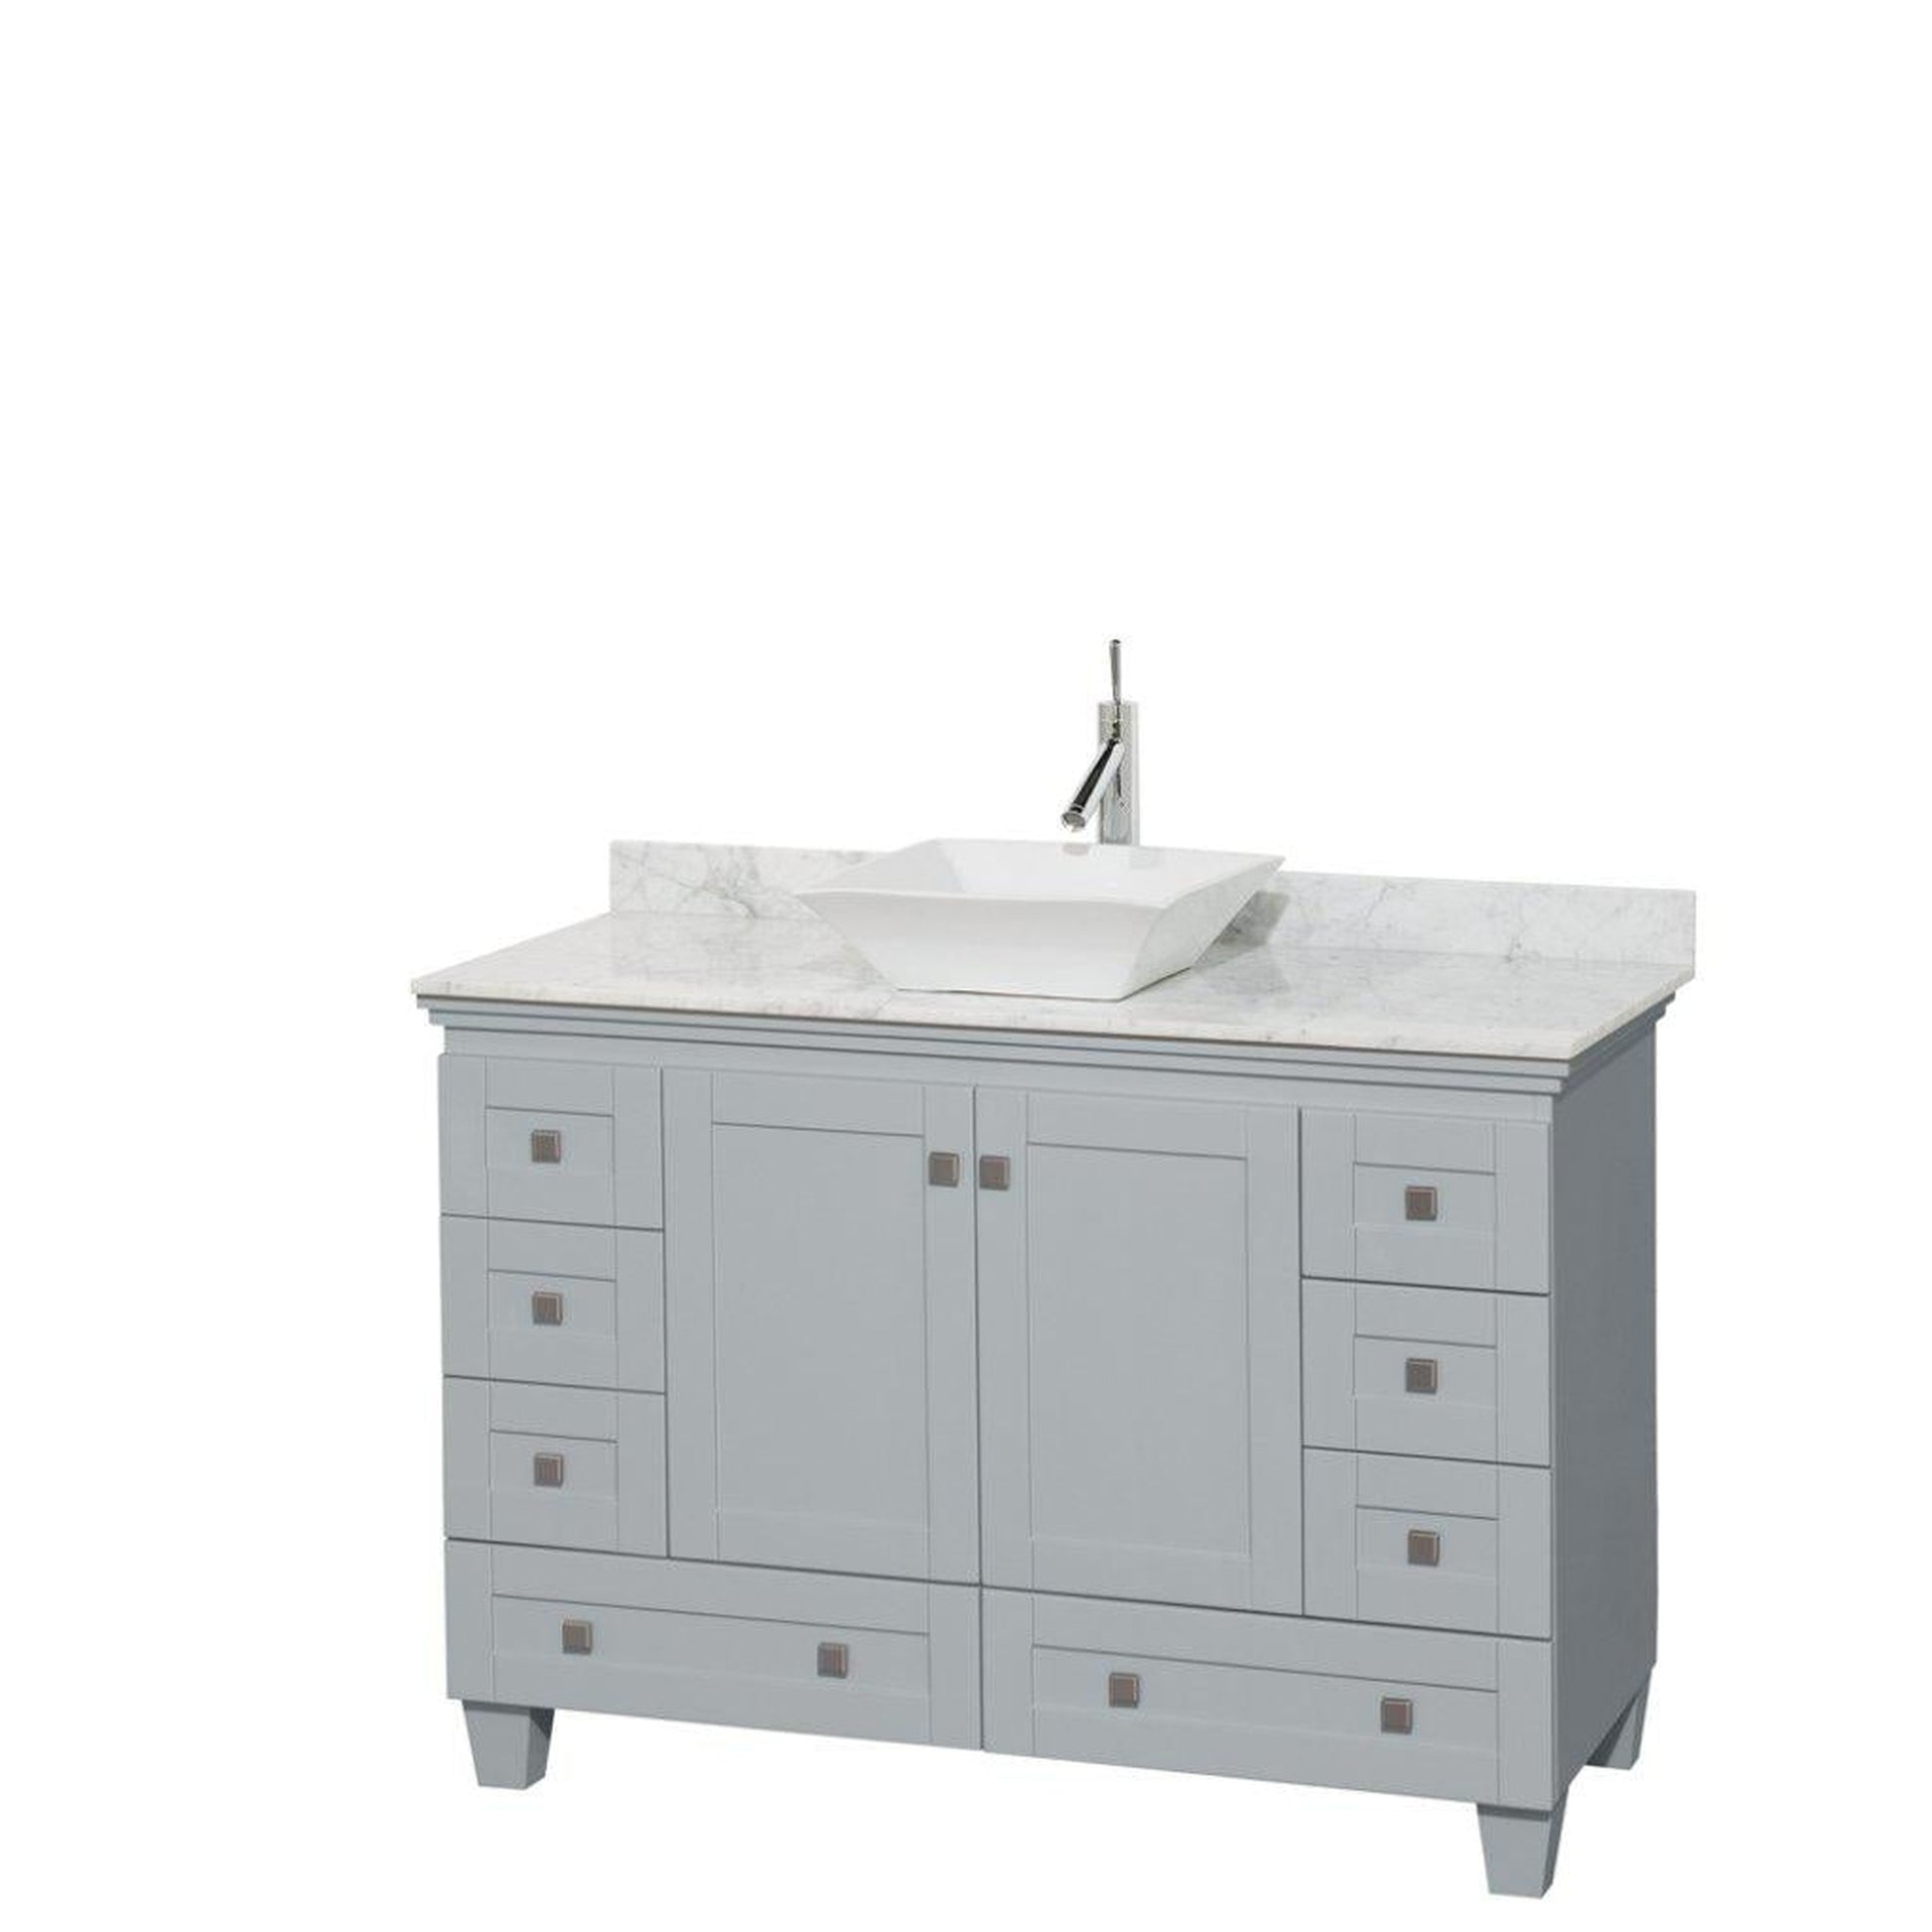 Wyndham Collection Acclaim 48" Single Bathroom Oyster Gray Vanity With White Carrara Marble Countertop And Pyra White Porcelain Sink